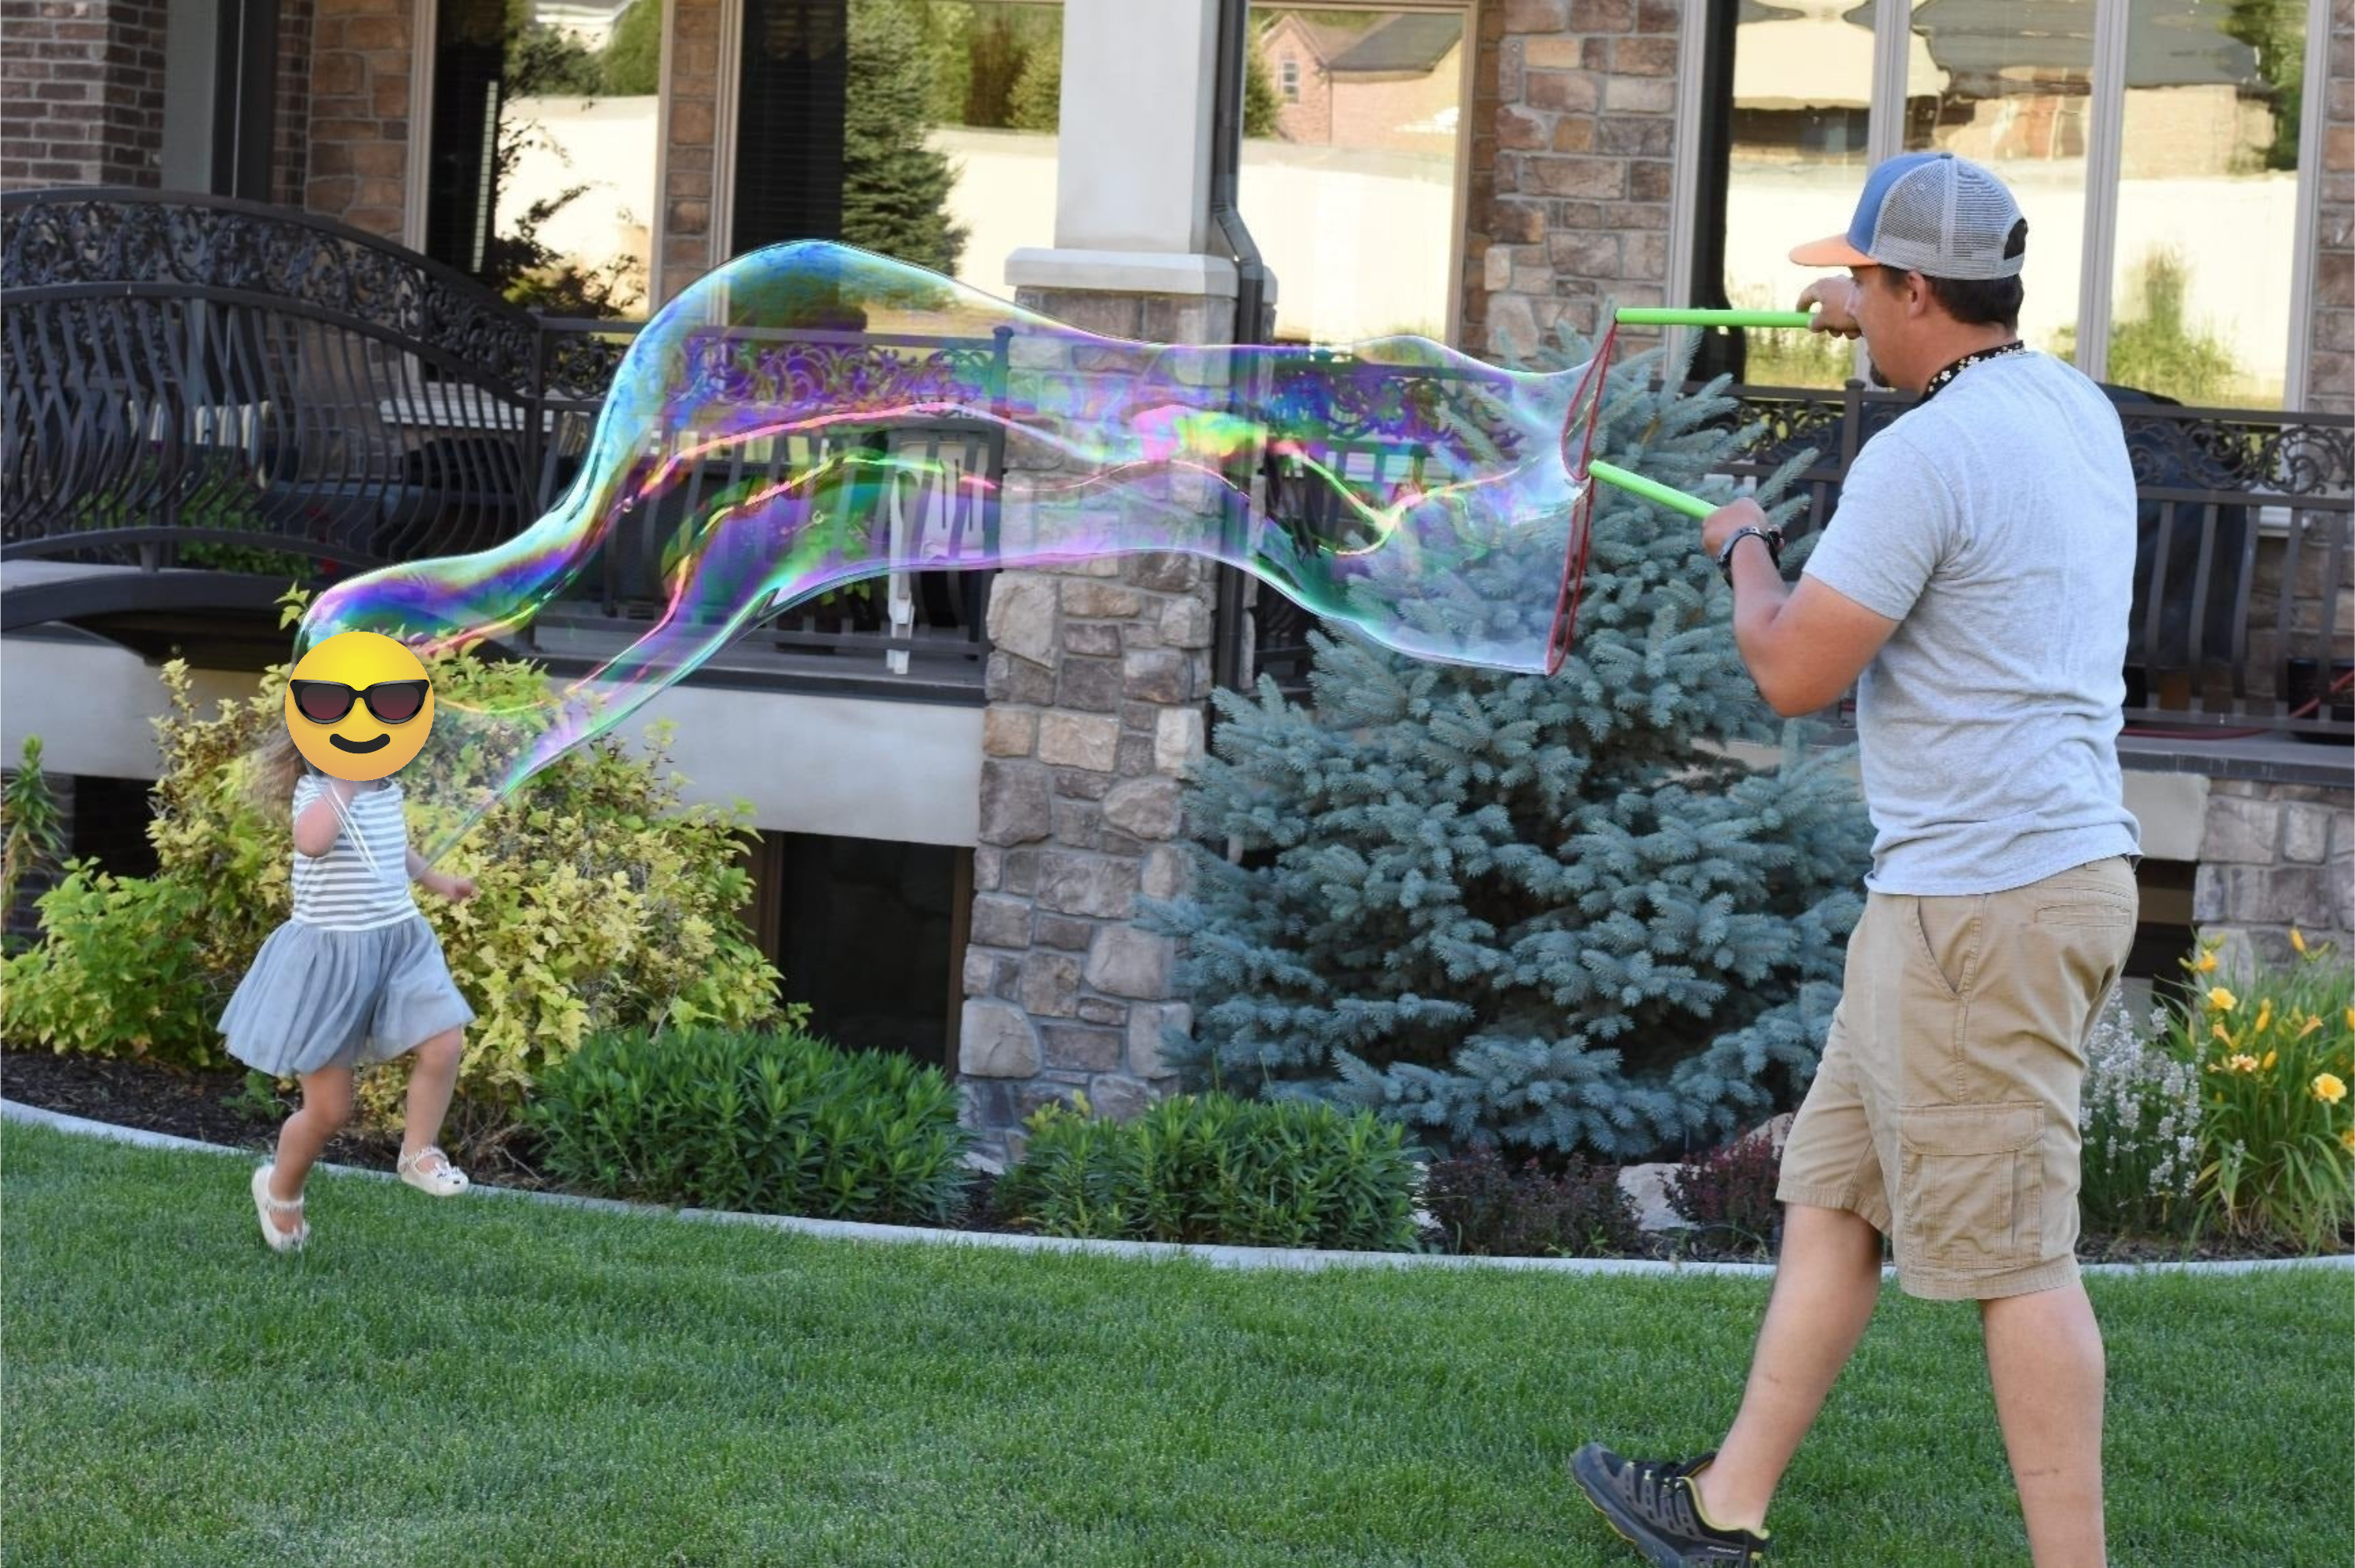 An adult wearing casual clothing creates large bubbles in a garden, while a young child in a striped shirt and skirt runs towards them joyfully